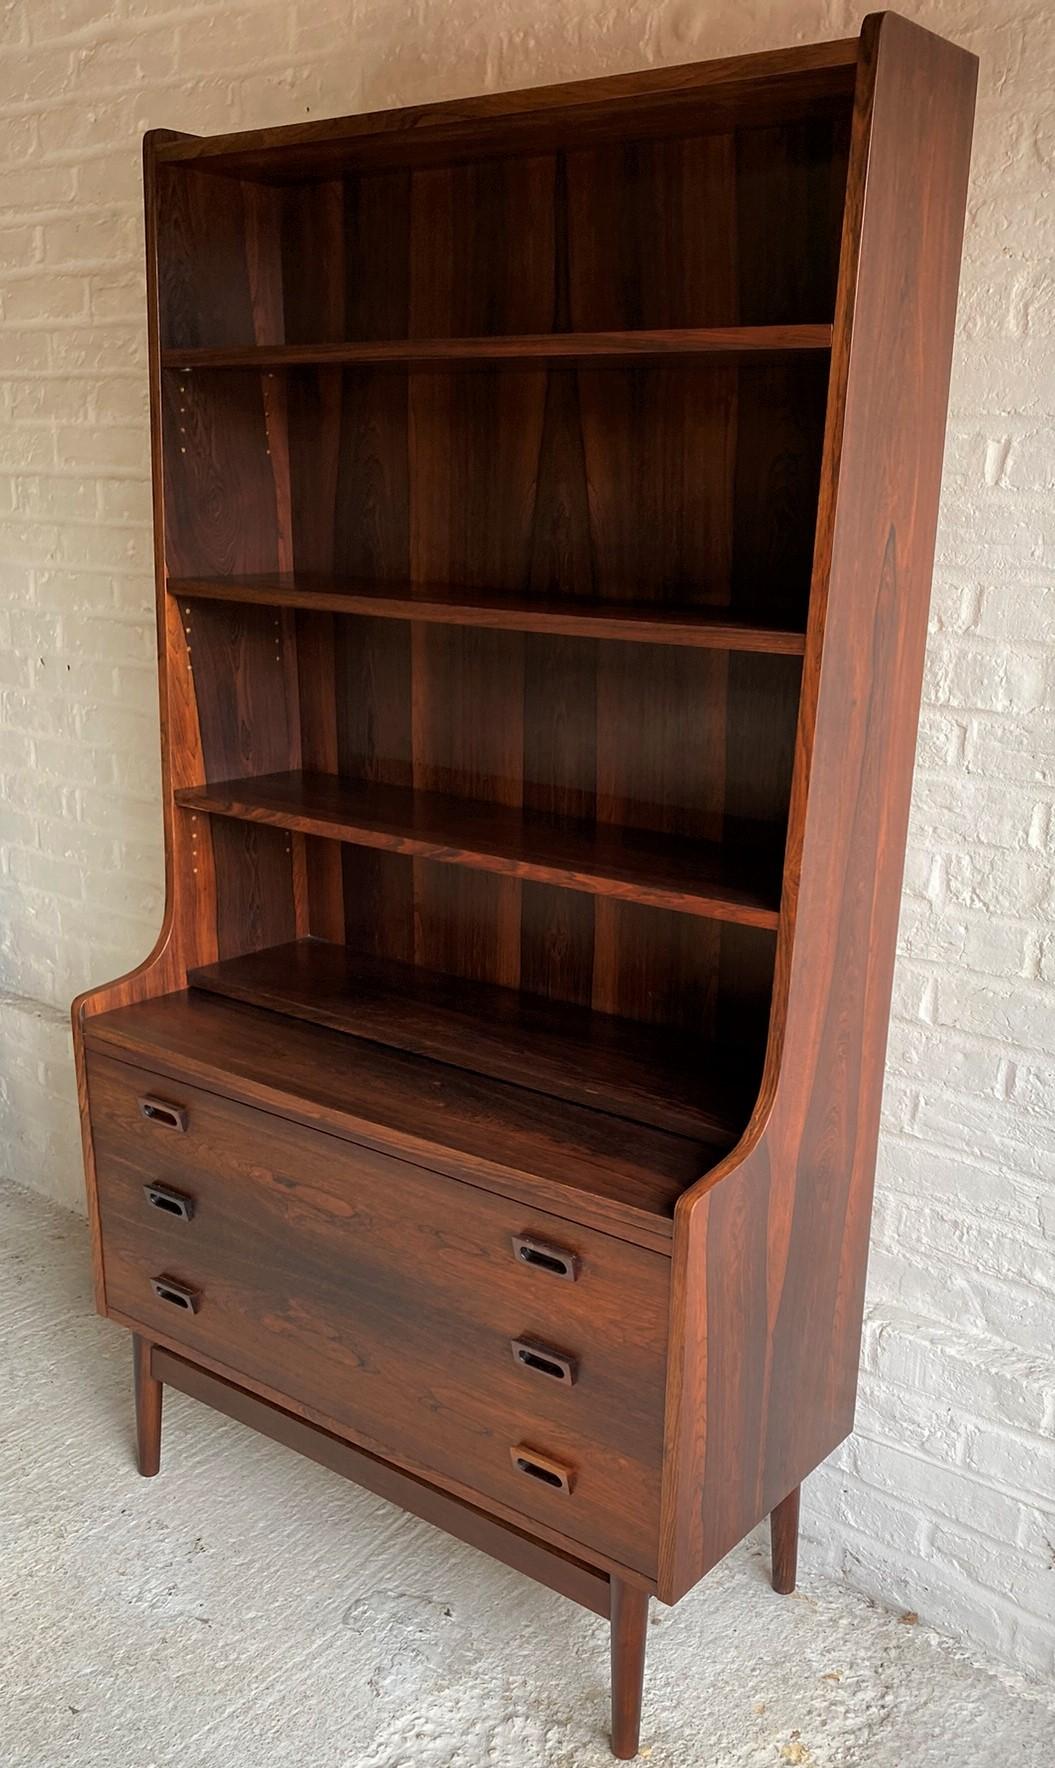 Mid-Century Modern Danish rosewood secretaire bookcase by Johannes Sorth, 1965

This stunning Rosewood Secretaire / bookcase was designed by Johannes Sorth in Denmark in the 1960s and manufactured by Bornholm Møbelfabrik. 
The top half of the unit